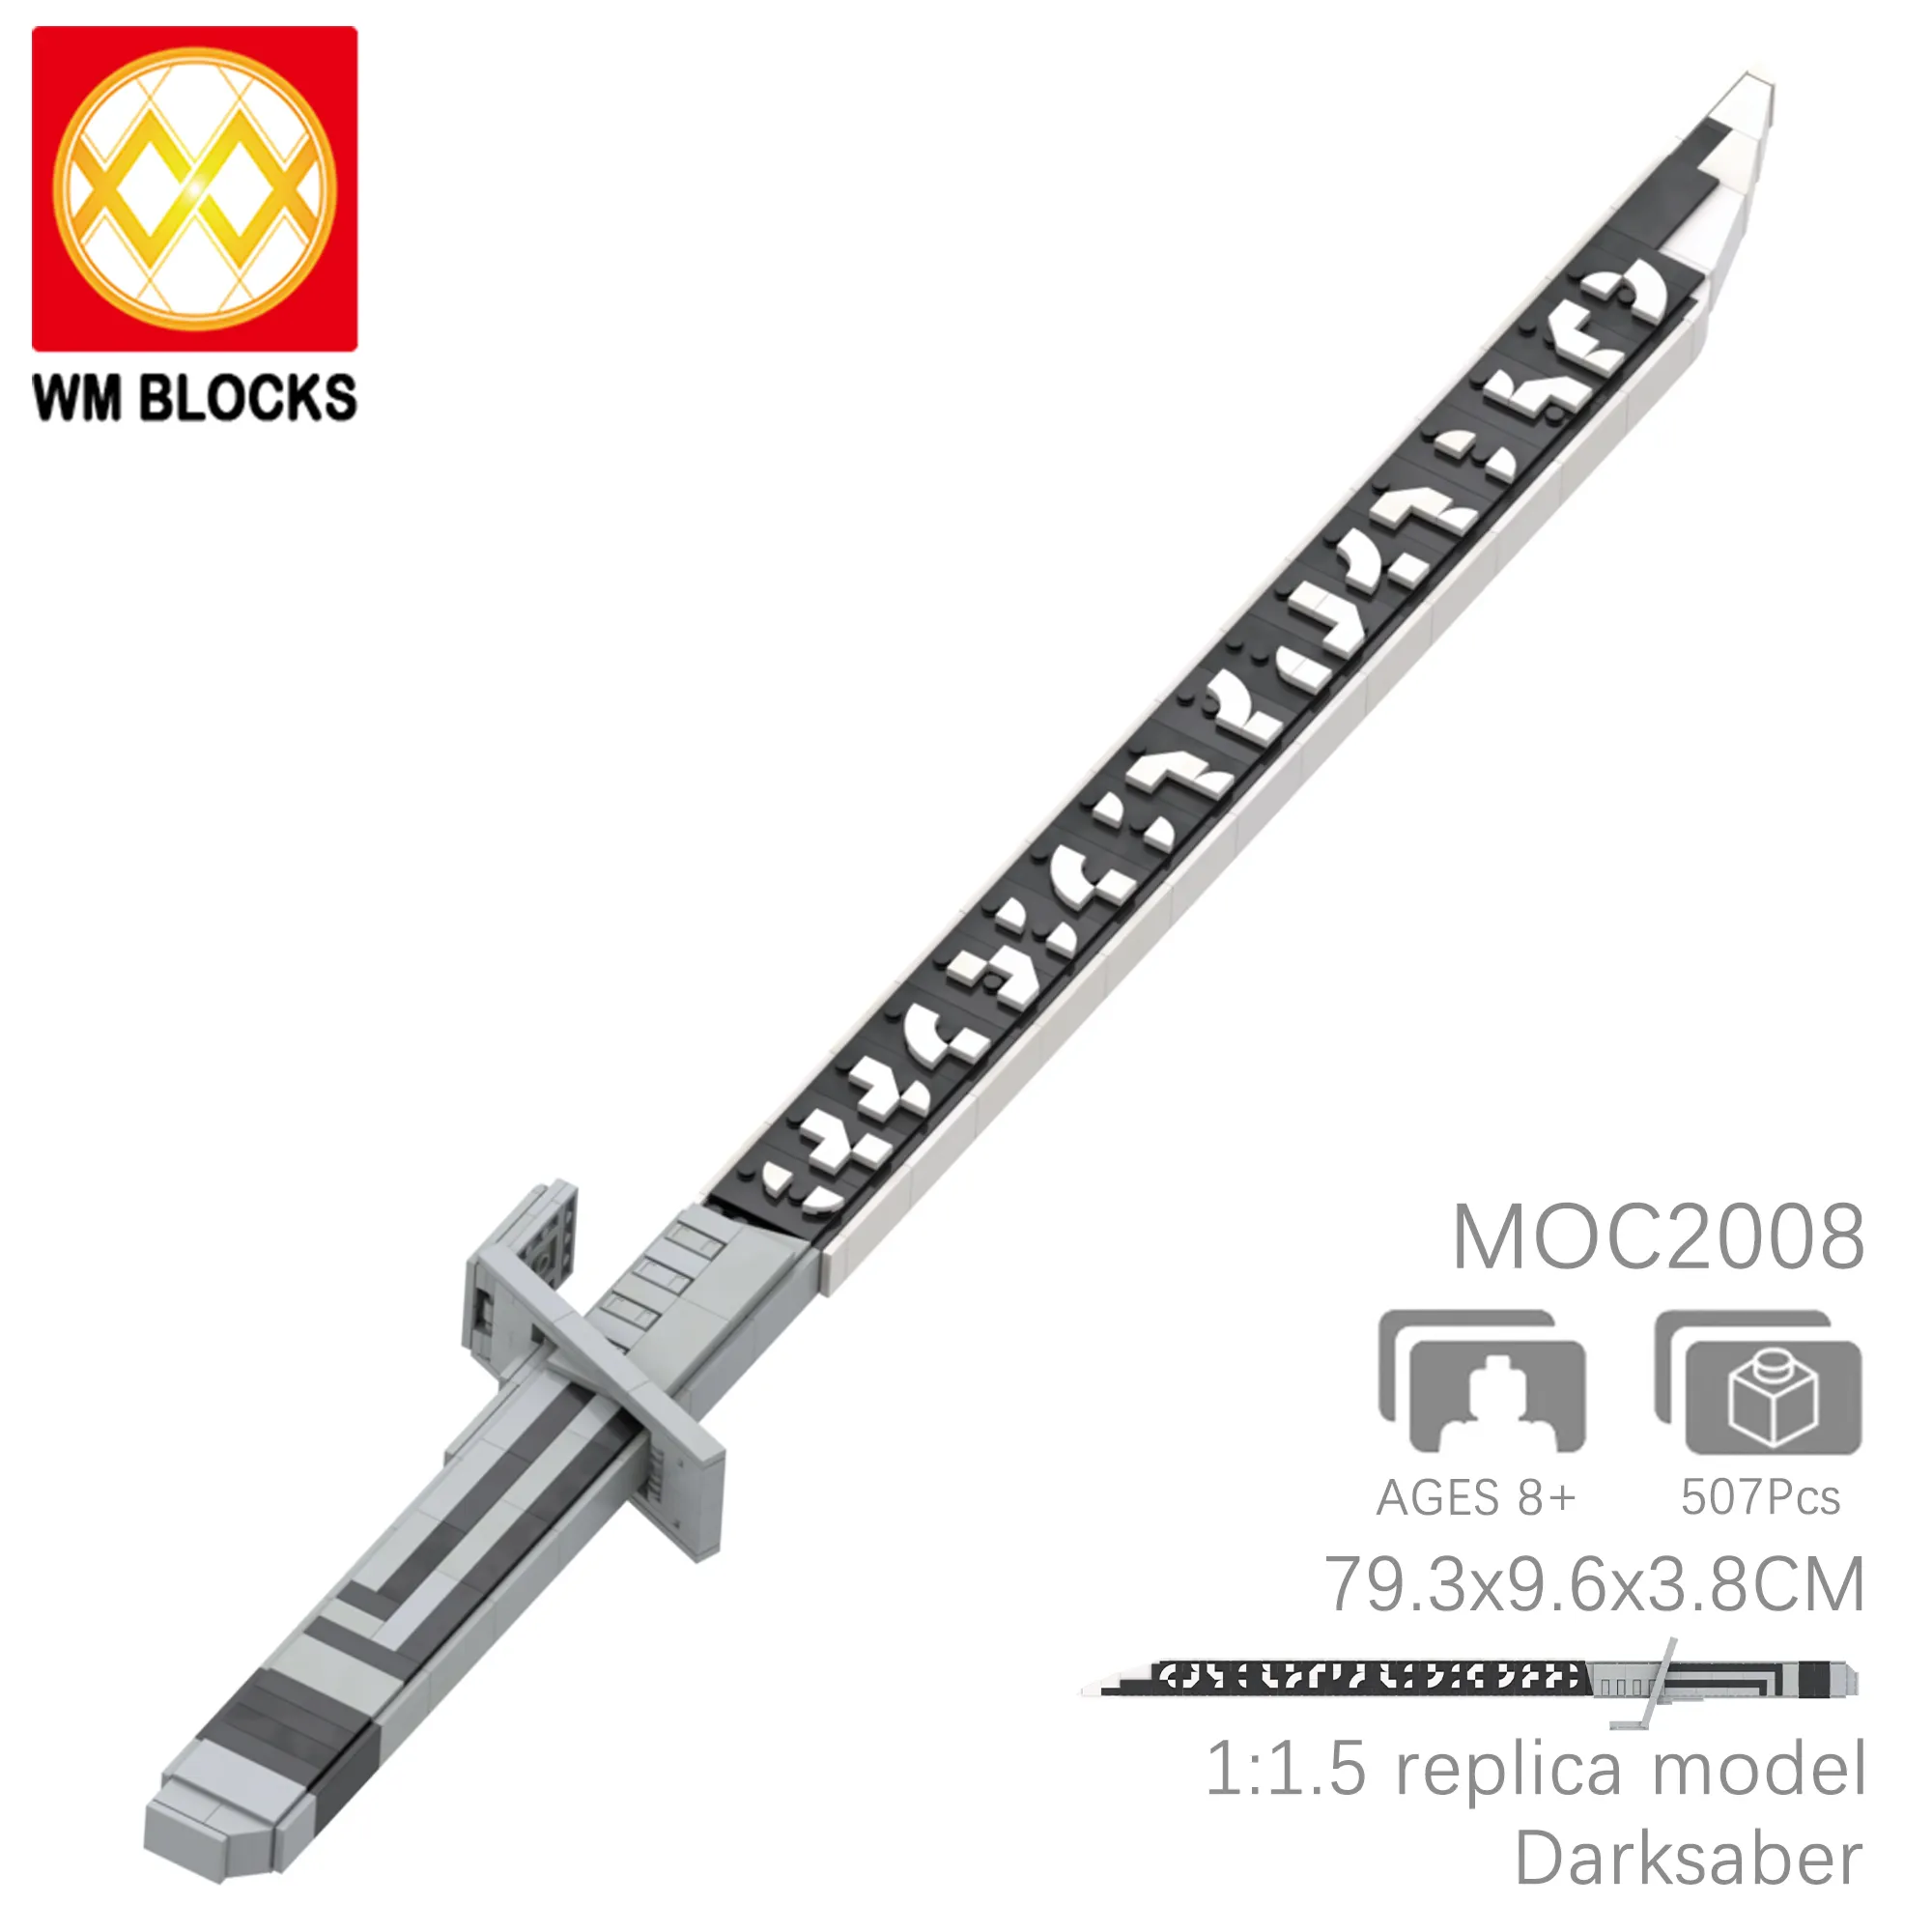 MOC2008 DARKSABER 1:1.5 real model Hot Sale space wars new arrival bricks Movie Action Collection figures Building Blocks Toys